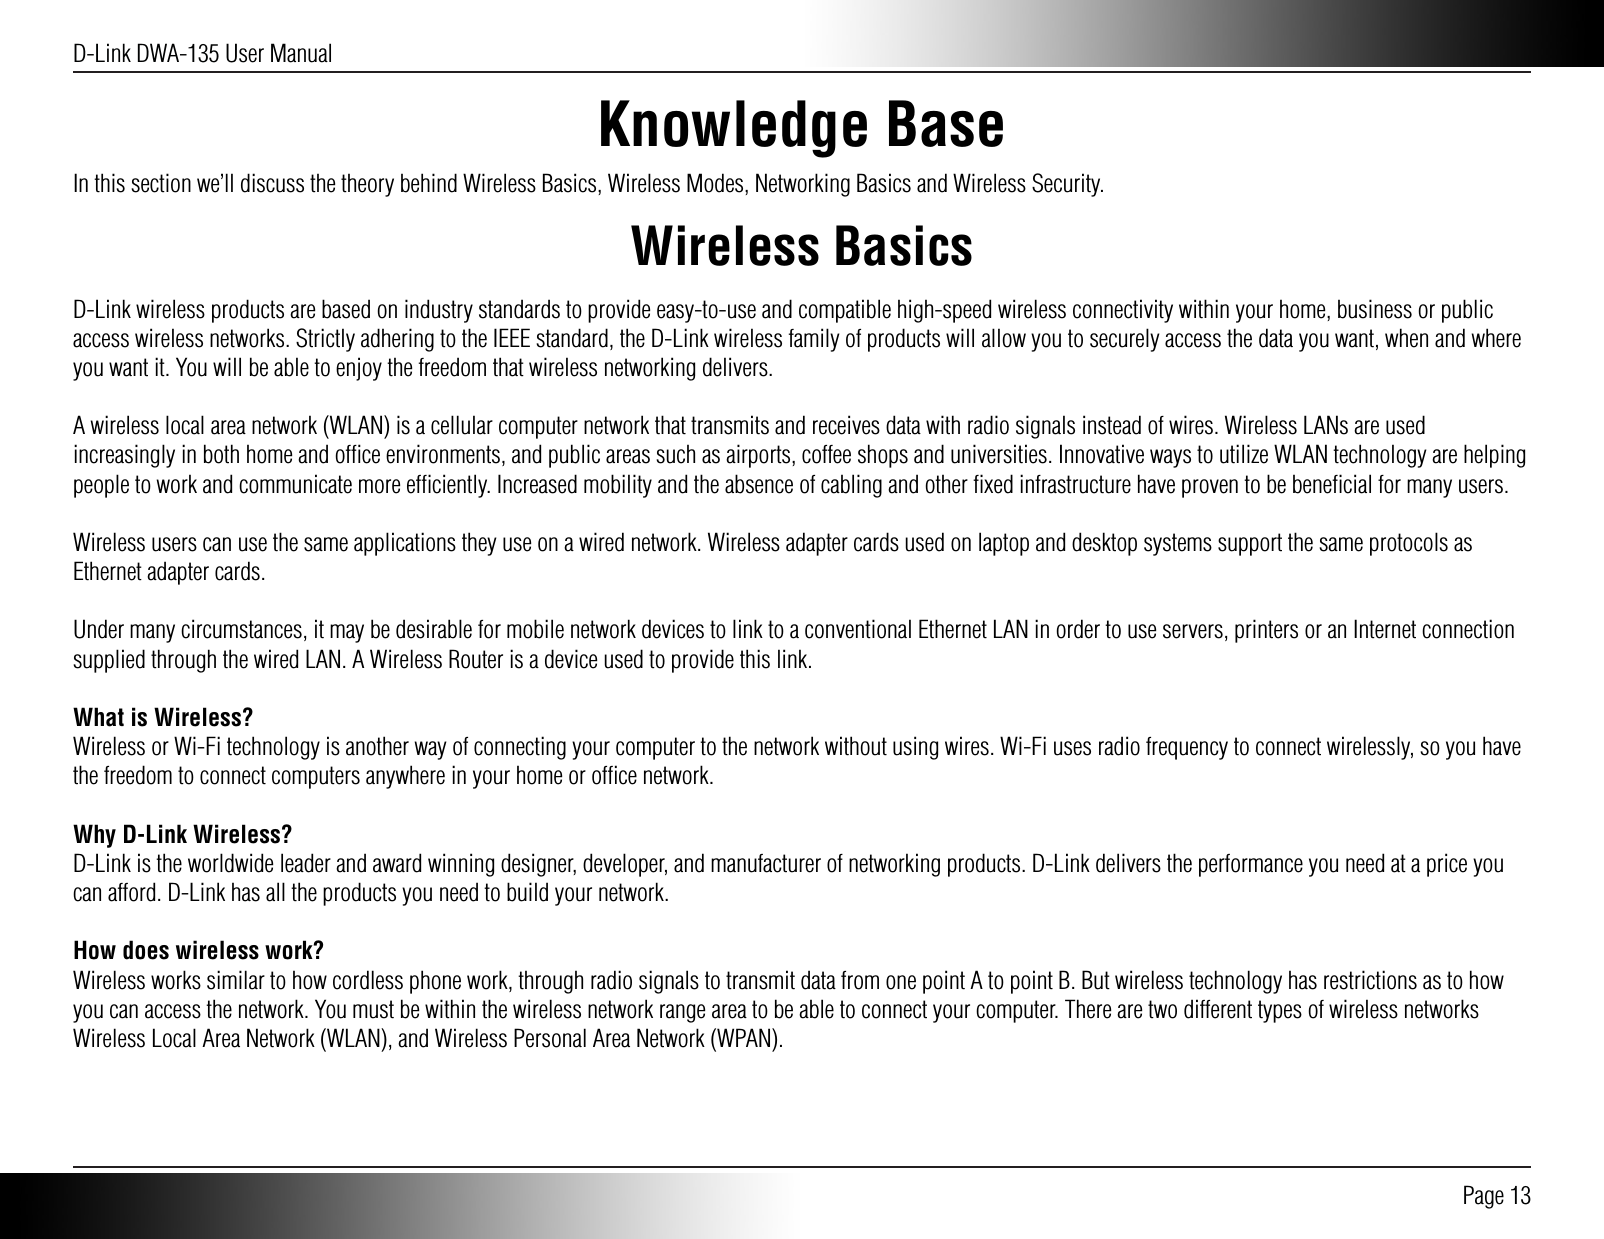 D-Link DWA-135 User Manual Page 13Knowledge BaseIn this section we’ll discuss the theory behind Wireless Basics, Wireless Modes, Networking Basics and Wireless Security.Wireless BasicsD-Link wireless products are based on industry standards to provide easy-to-use and compatible high-speed wireless connectivity within your home, business or public access wireless networks. Strictly adhering to the IEEE standard, the D-Link wireless family of products will allow you to securely access the data you want, when and where you want it. You will be able to enjoy the freedom that wireless networking delivers.A wireless local area network (WLAN) is a cellular computer network that transmits and receives data with radio signals instead of wires. Wireless LANs are used increasingly in both home and ofﬁce environments, and public areas such as airports, coffee shops and universities. Innovative ways to utilize WLAN technology are helping people to work and communicate more efﬁciently. Increased mobility and the absence of cabling and other ﬁxed infrastructure have proven to be beneﬁcial for many users.Wireless users can use the same applications they use on a wired network. Wireless adapter cards used on laptop and desktop systems support the same protocols as Ethernet adapter cards. Under many circumstances, it may be desirable for mobile network devices to link to a conventional Ethernet LAN in order to use servers, printers or an Internet connection supplied through the wired LAN. A Wireless Router is a device used to provide this link.What is Wireless?Wireless or Wi-Fi technology is another way of connecting your computer to the network without using wires. Wi-Fi uses radio frequency to connect wirelessly, so you have the freedom to connect computers anywhere in your home or ofﬁce network.Why D-Link Wireless?D-Link is the worldwide leader and award winning designer, developer, and manufacturer of networking products. D-Link delivers the performance you need at a price you can afford. D-Link has all the products you need to build your network.How does wireless work?Wireless works similar to how cordless phone work, through radio signals to transmit data from one point A to point B. But wireless technology has restrictions as to how you can access the network. You must be within the wireless network range area to be able to connect your computer. There are two different types of wireless networks Wireless Local Area Network (WLAN), and Wireless Personal Area Network (WPAN).